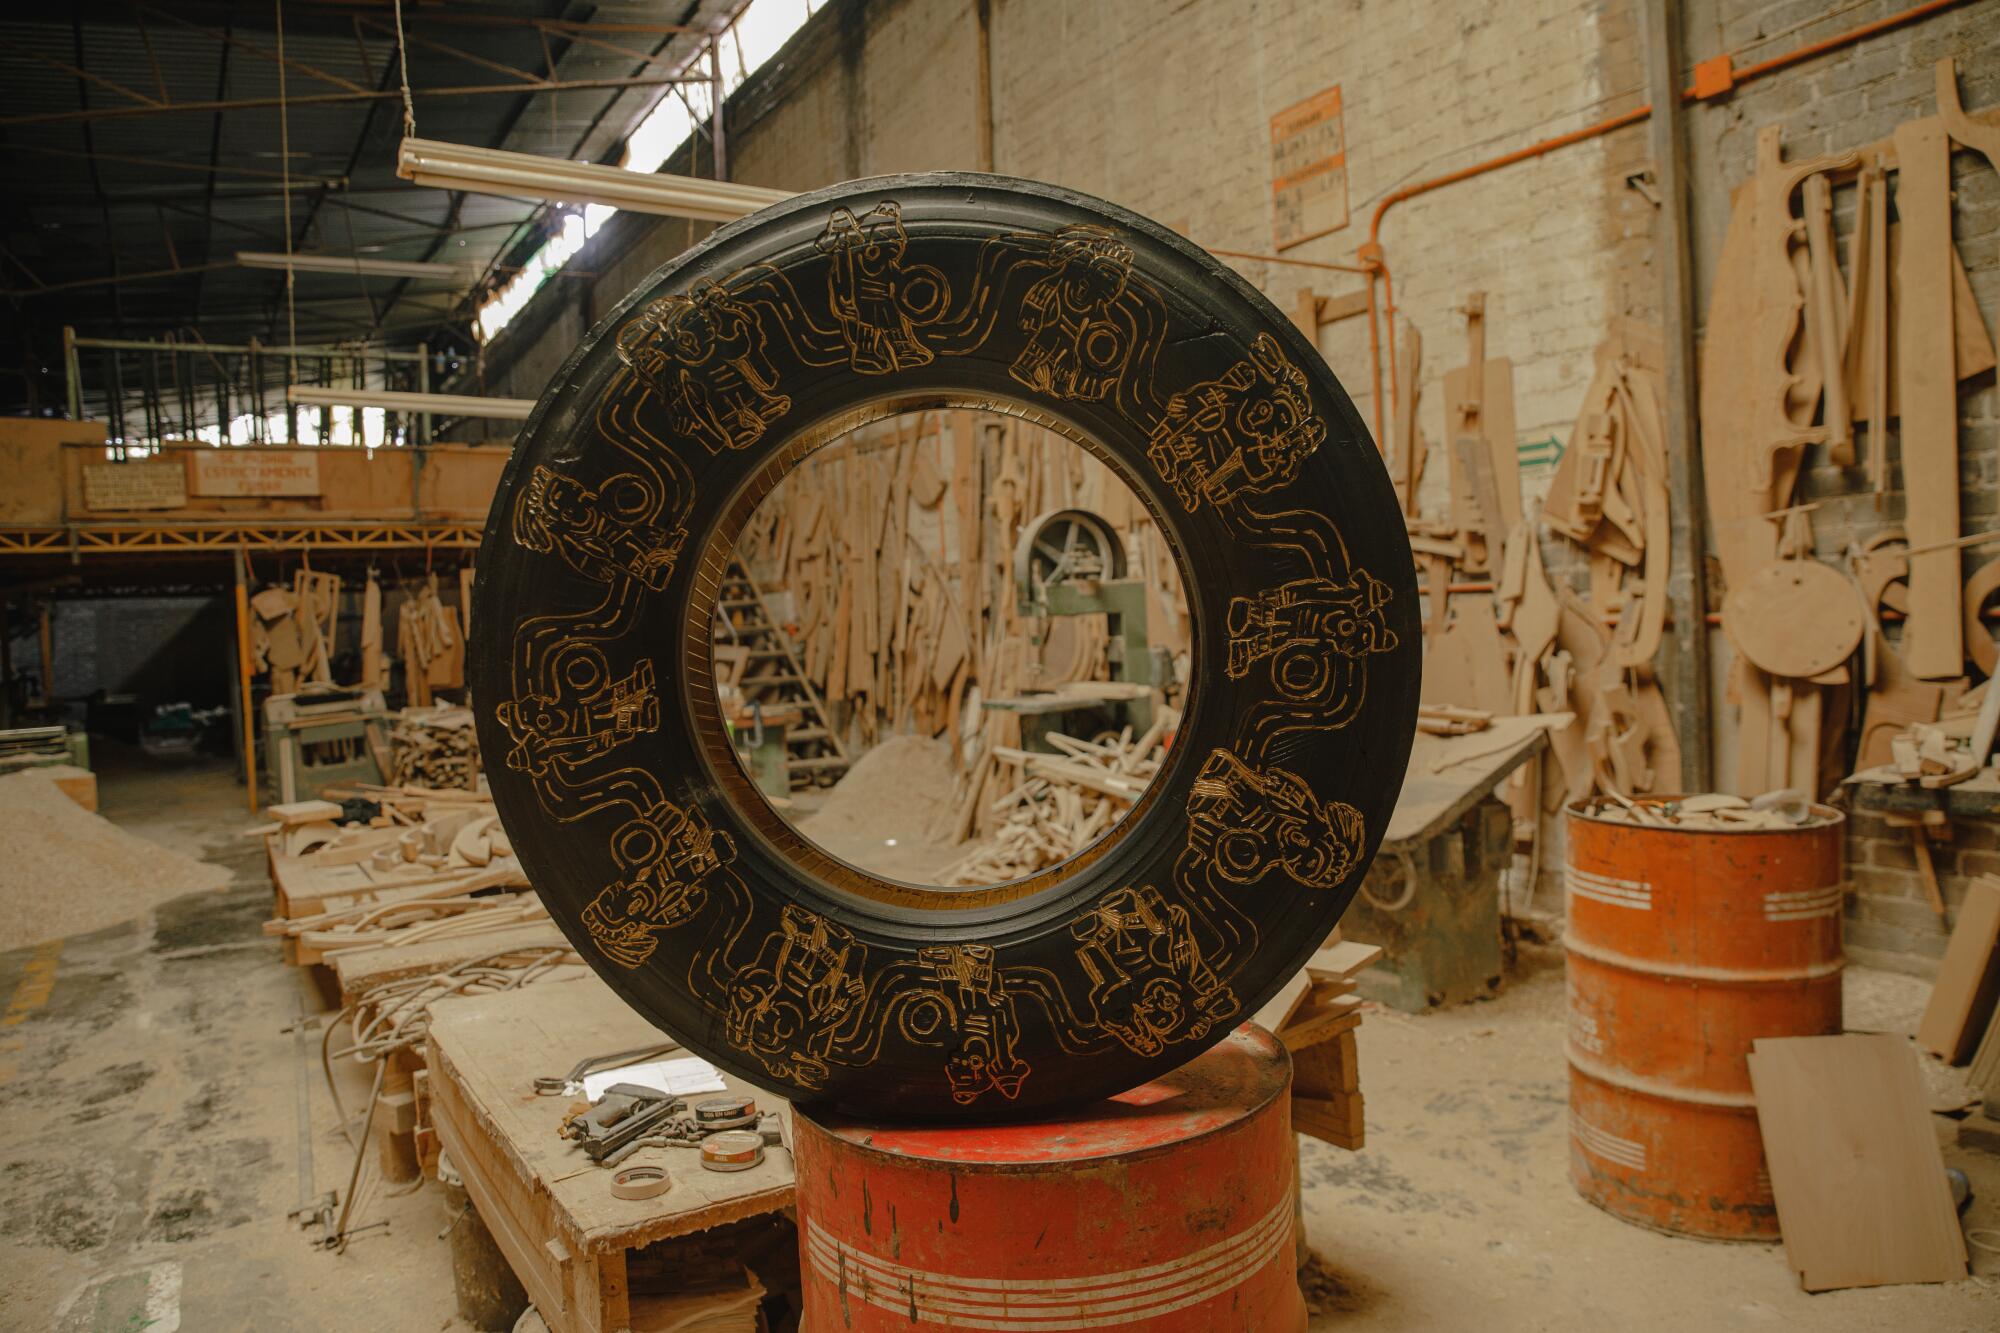 The side of a tire sculpture has been carved with designs reminiscent of ancient hieroglyphs.